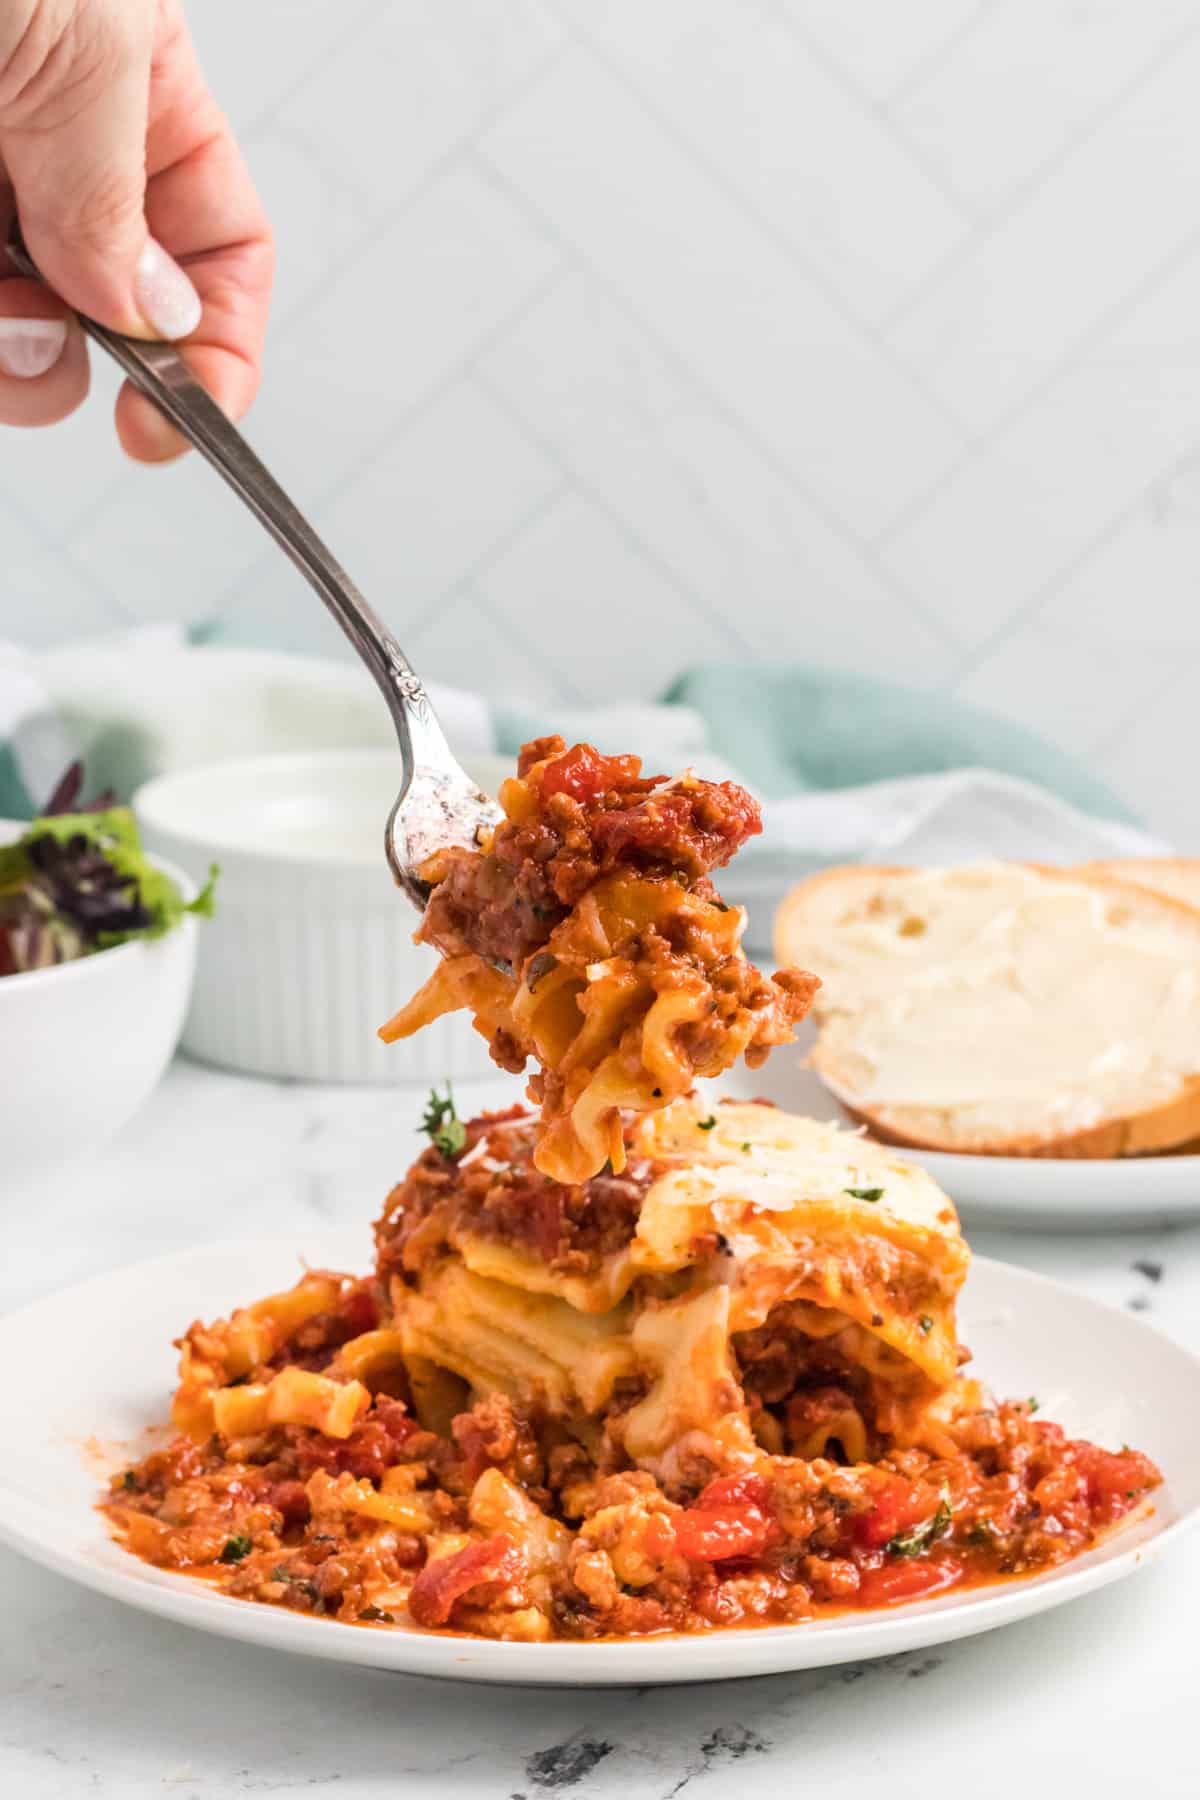 A fork is removing a bite of lasagna from a plated serving.